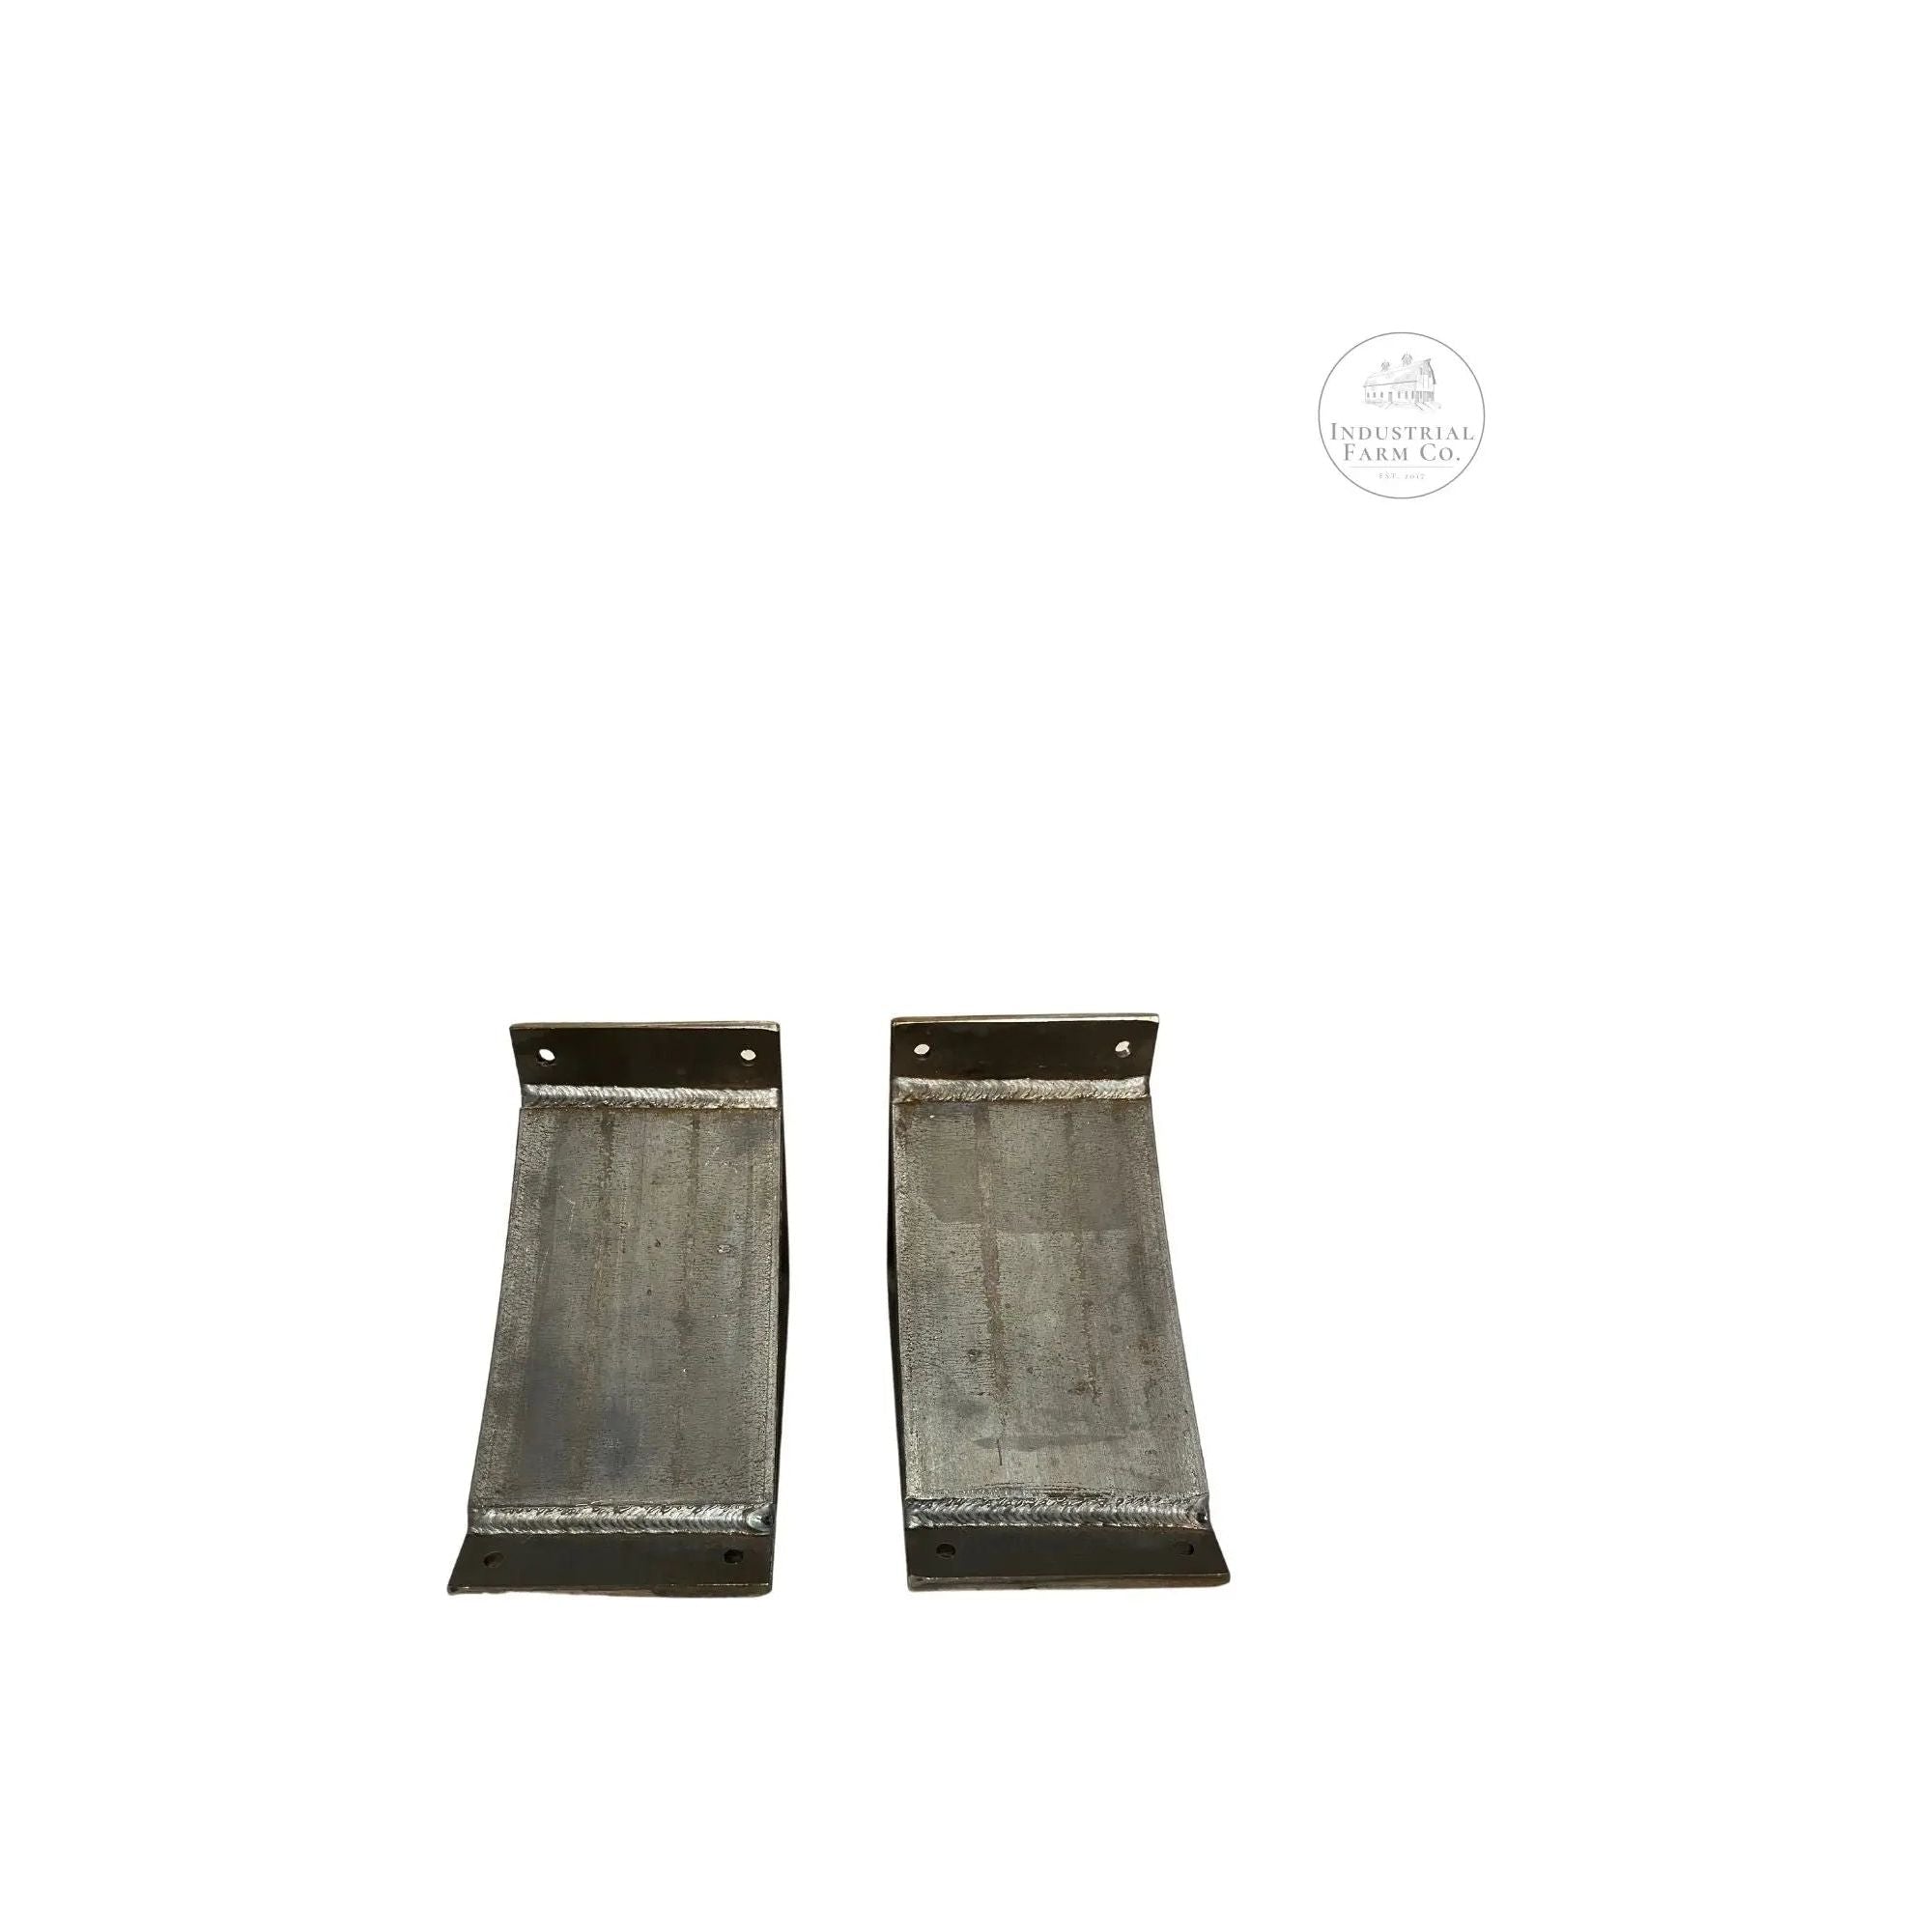 The Lexica Floating Shelf Supports 4 3/4 x 7 (Set of 2)     | Industrial Farm Co